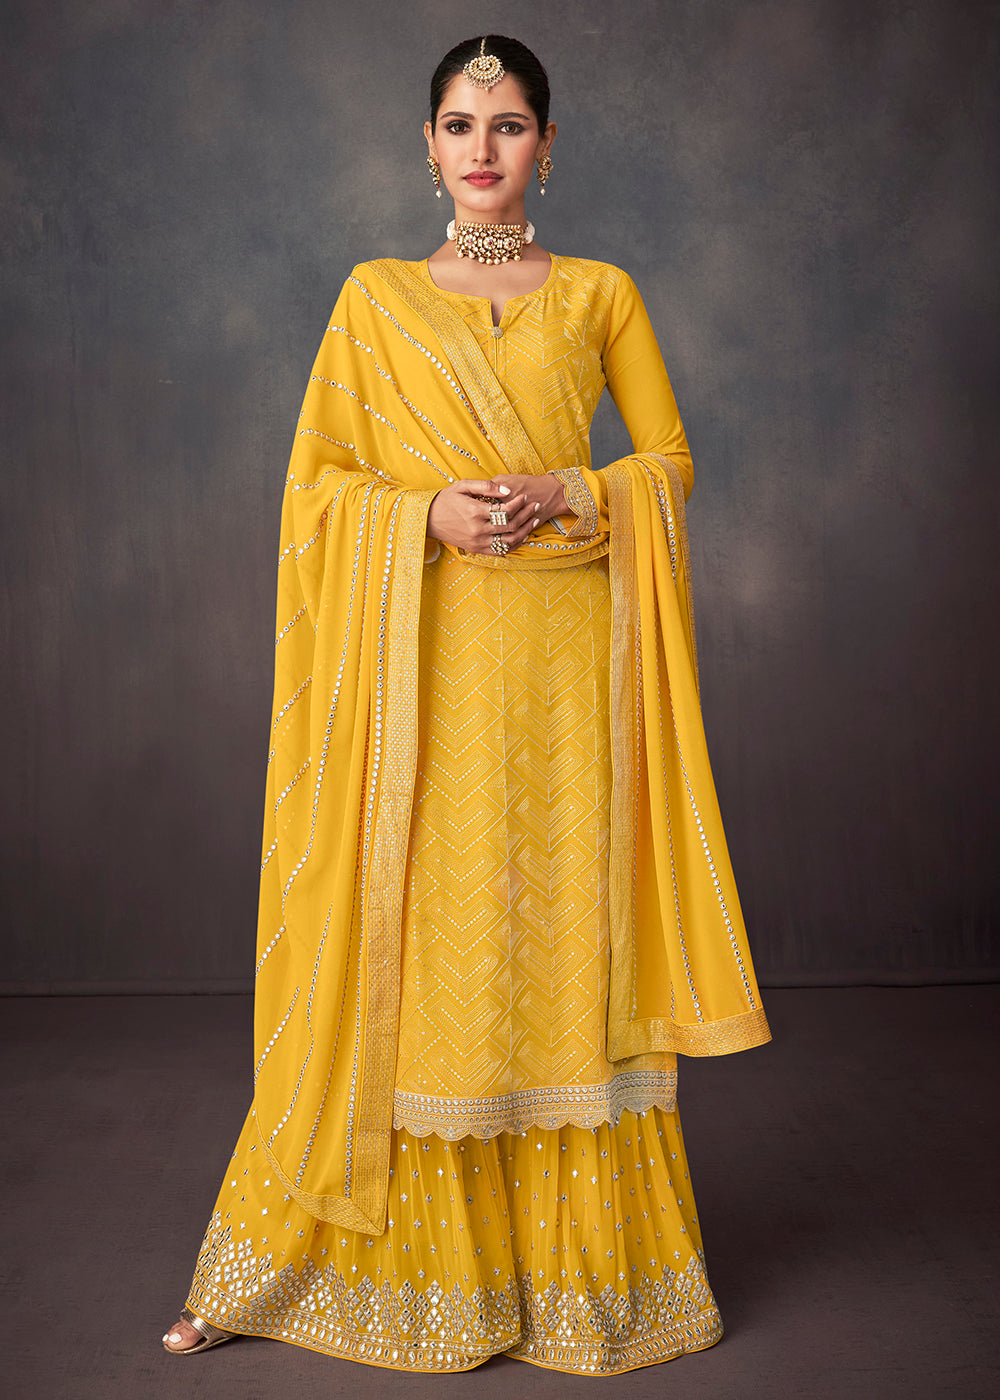 Shop Now Bright Yellow Georgette Embellished Festive Sharara Suit Online at Empress Clothing in USA, UK, Canada & Worldwide.